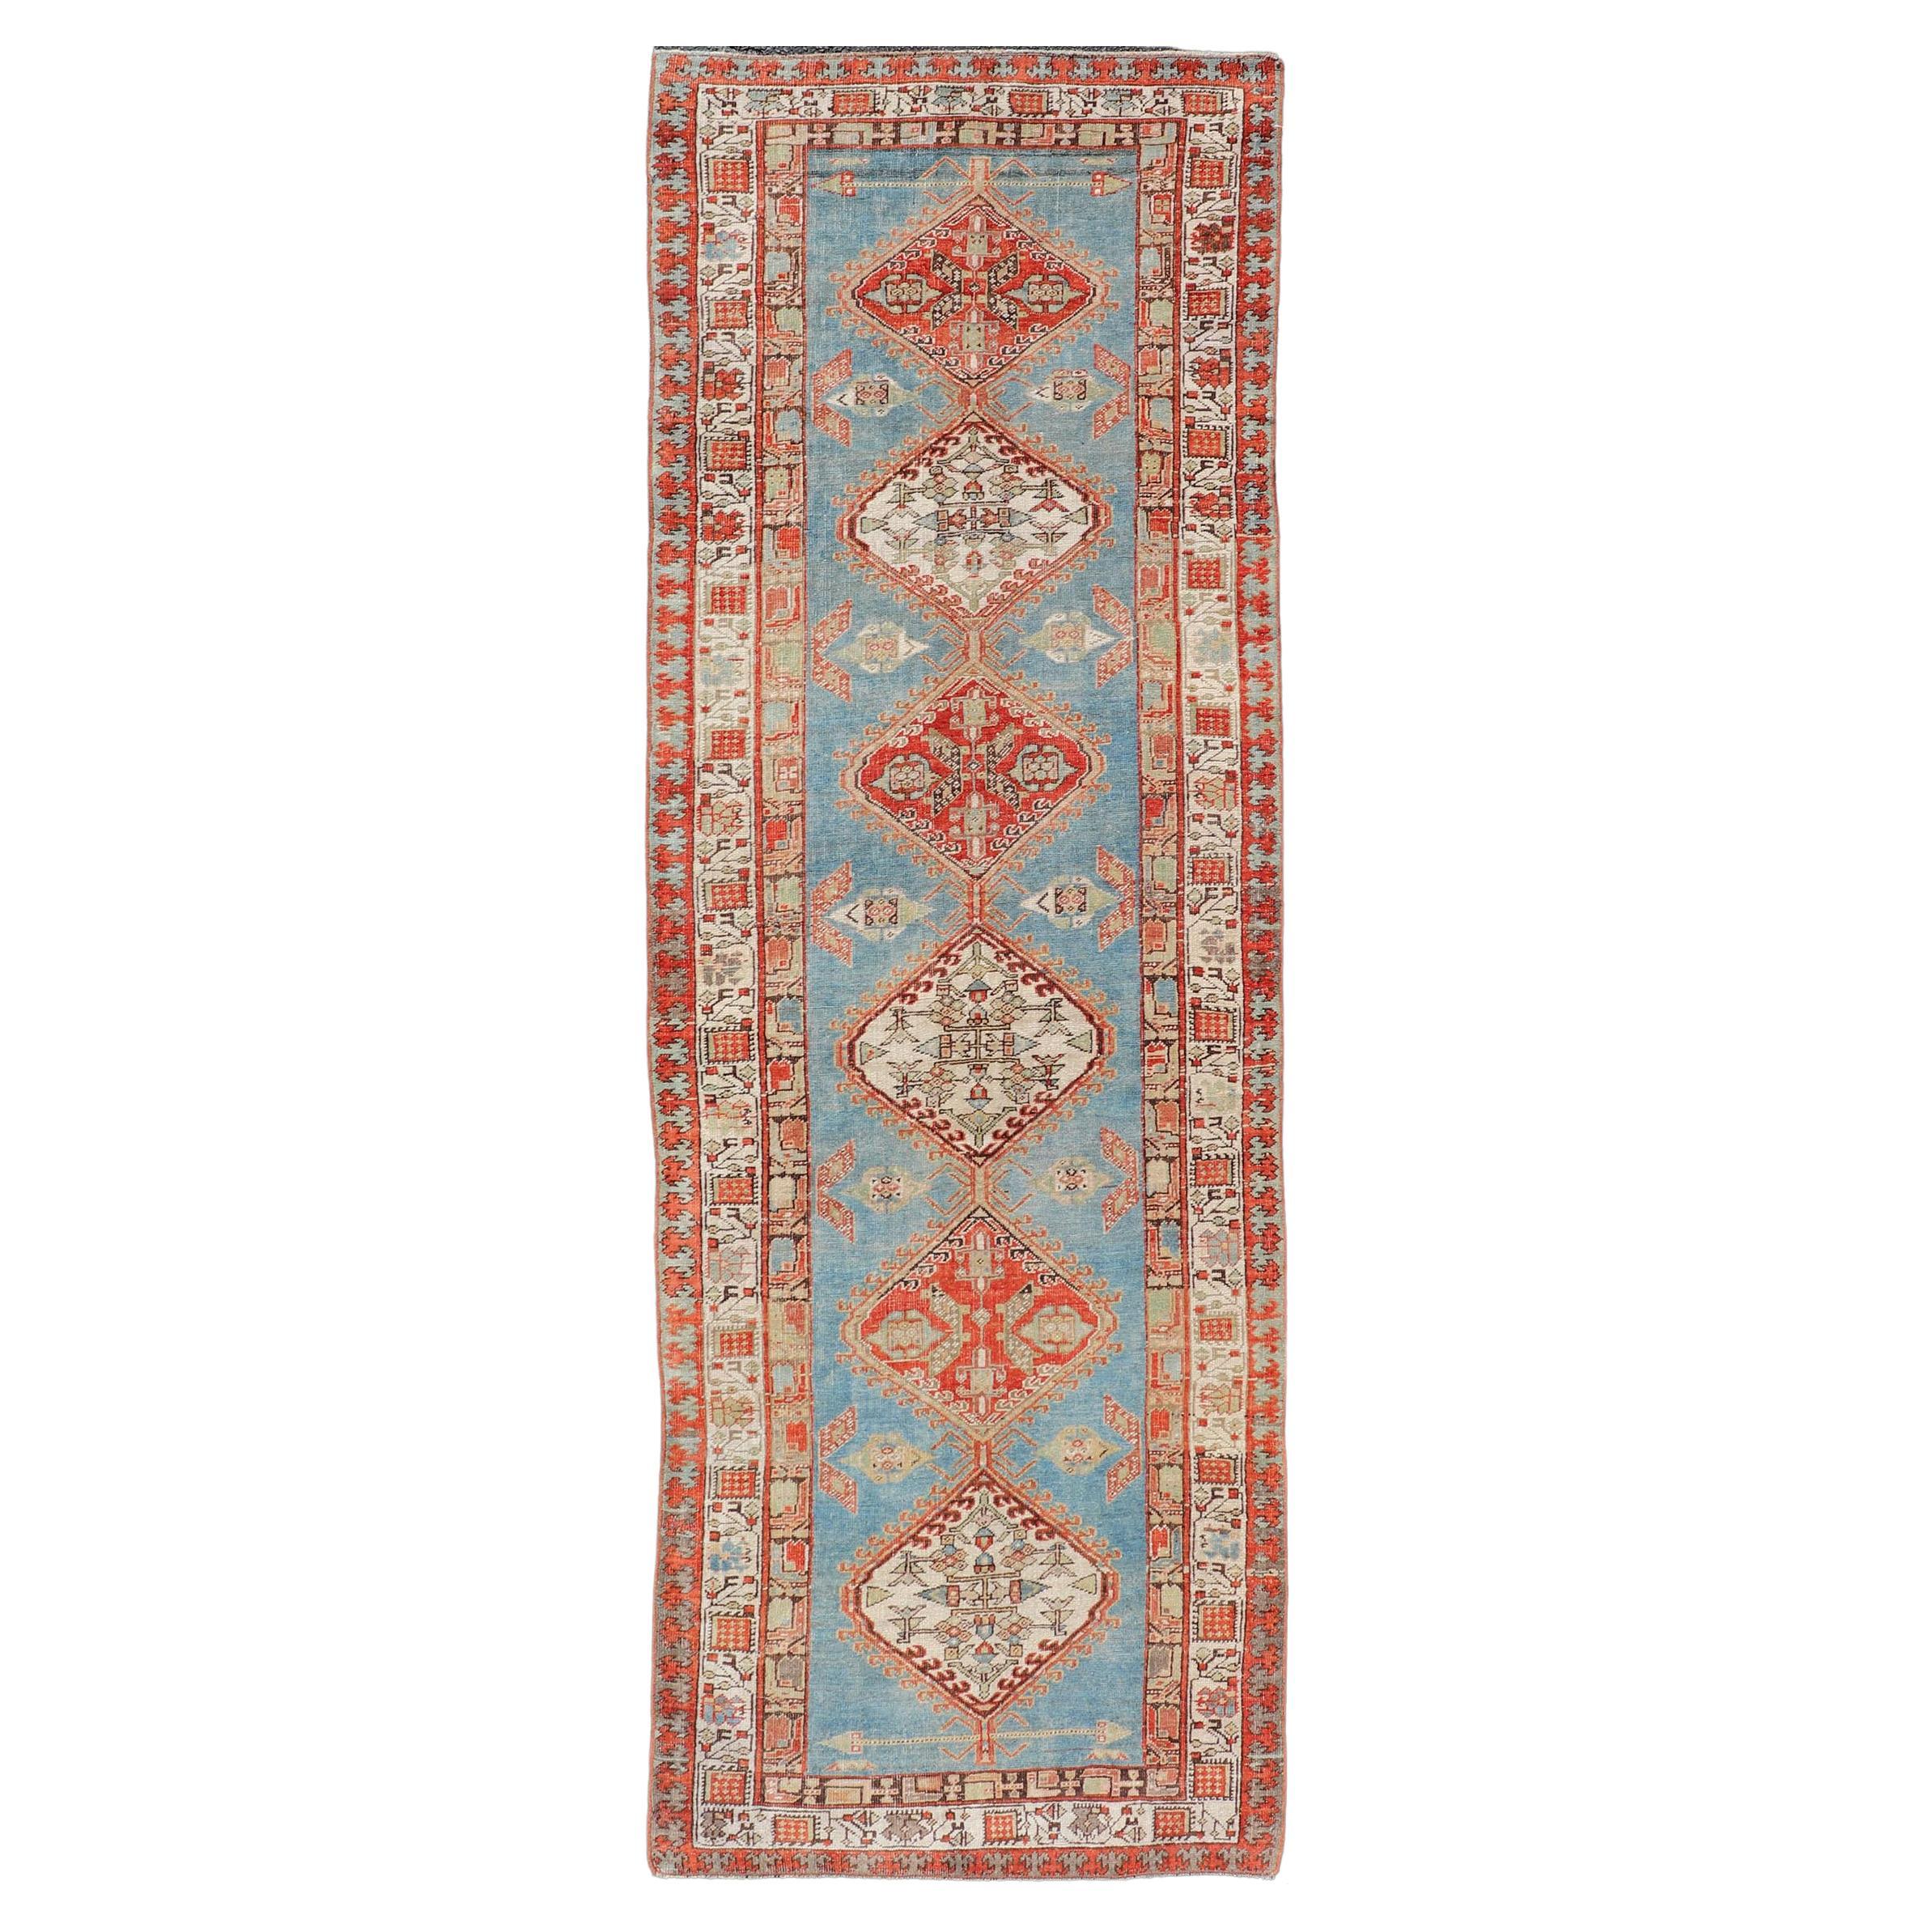 Antique Hand-Knotted Sarab Runner with Sub-Geometric Design in Red, Blue & Ivory